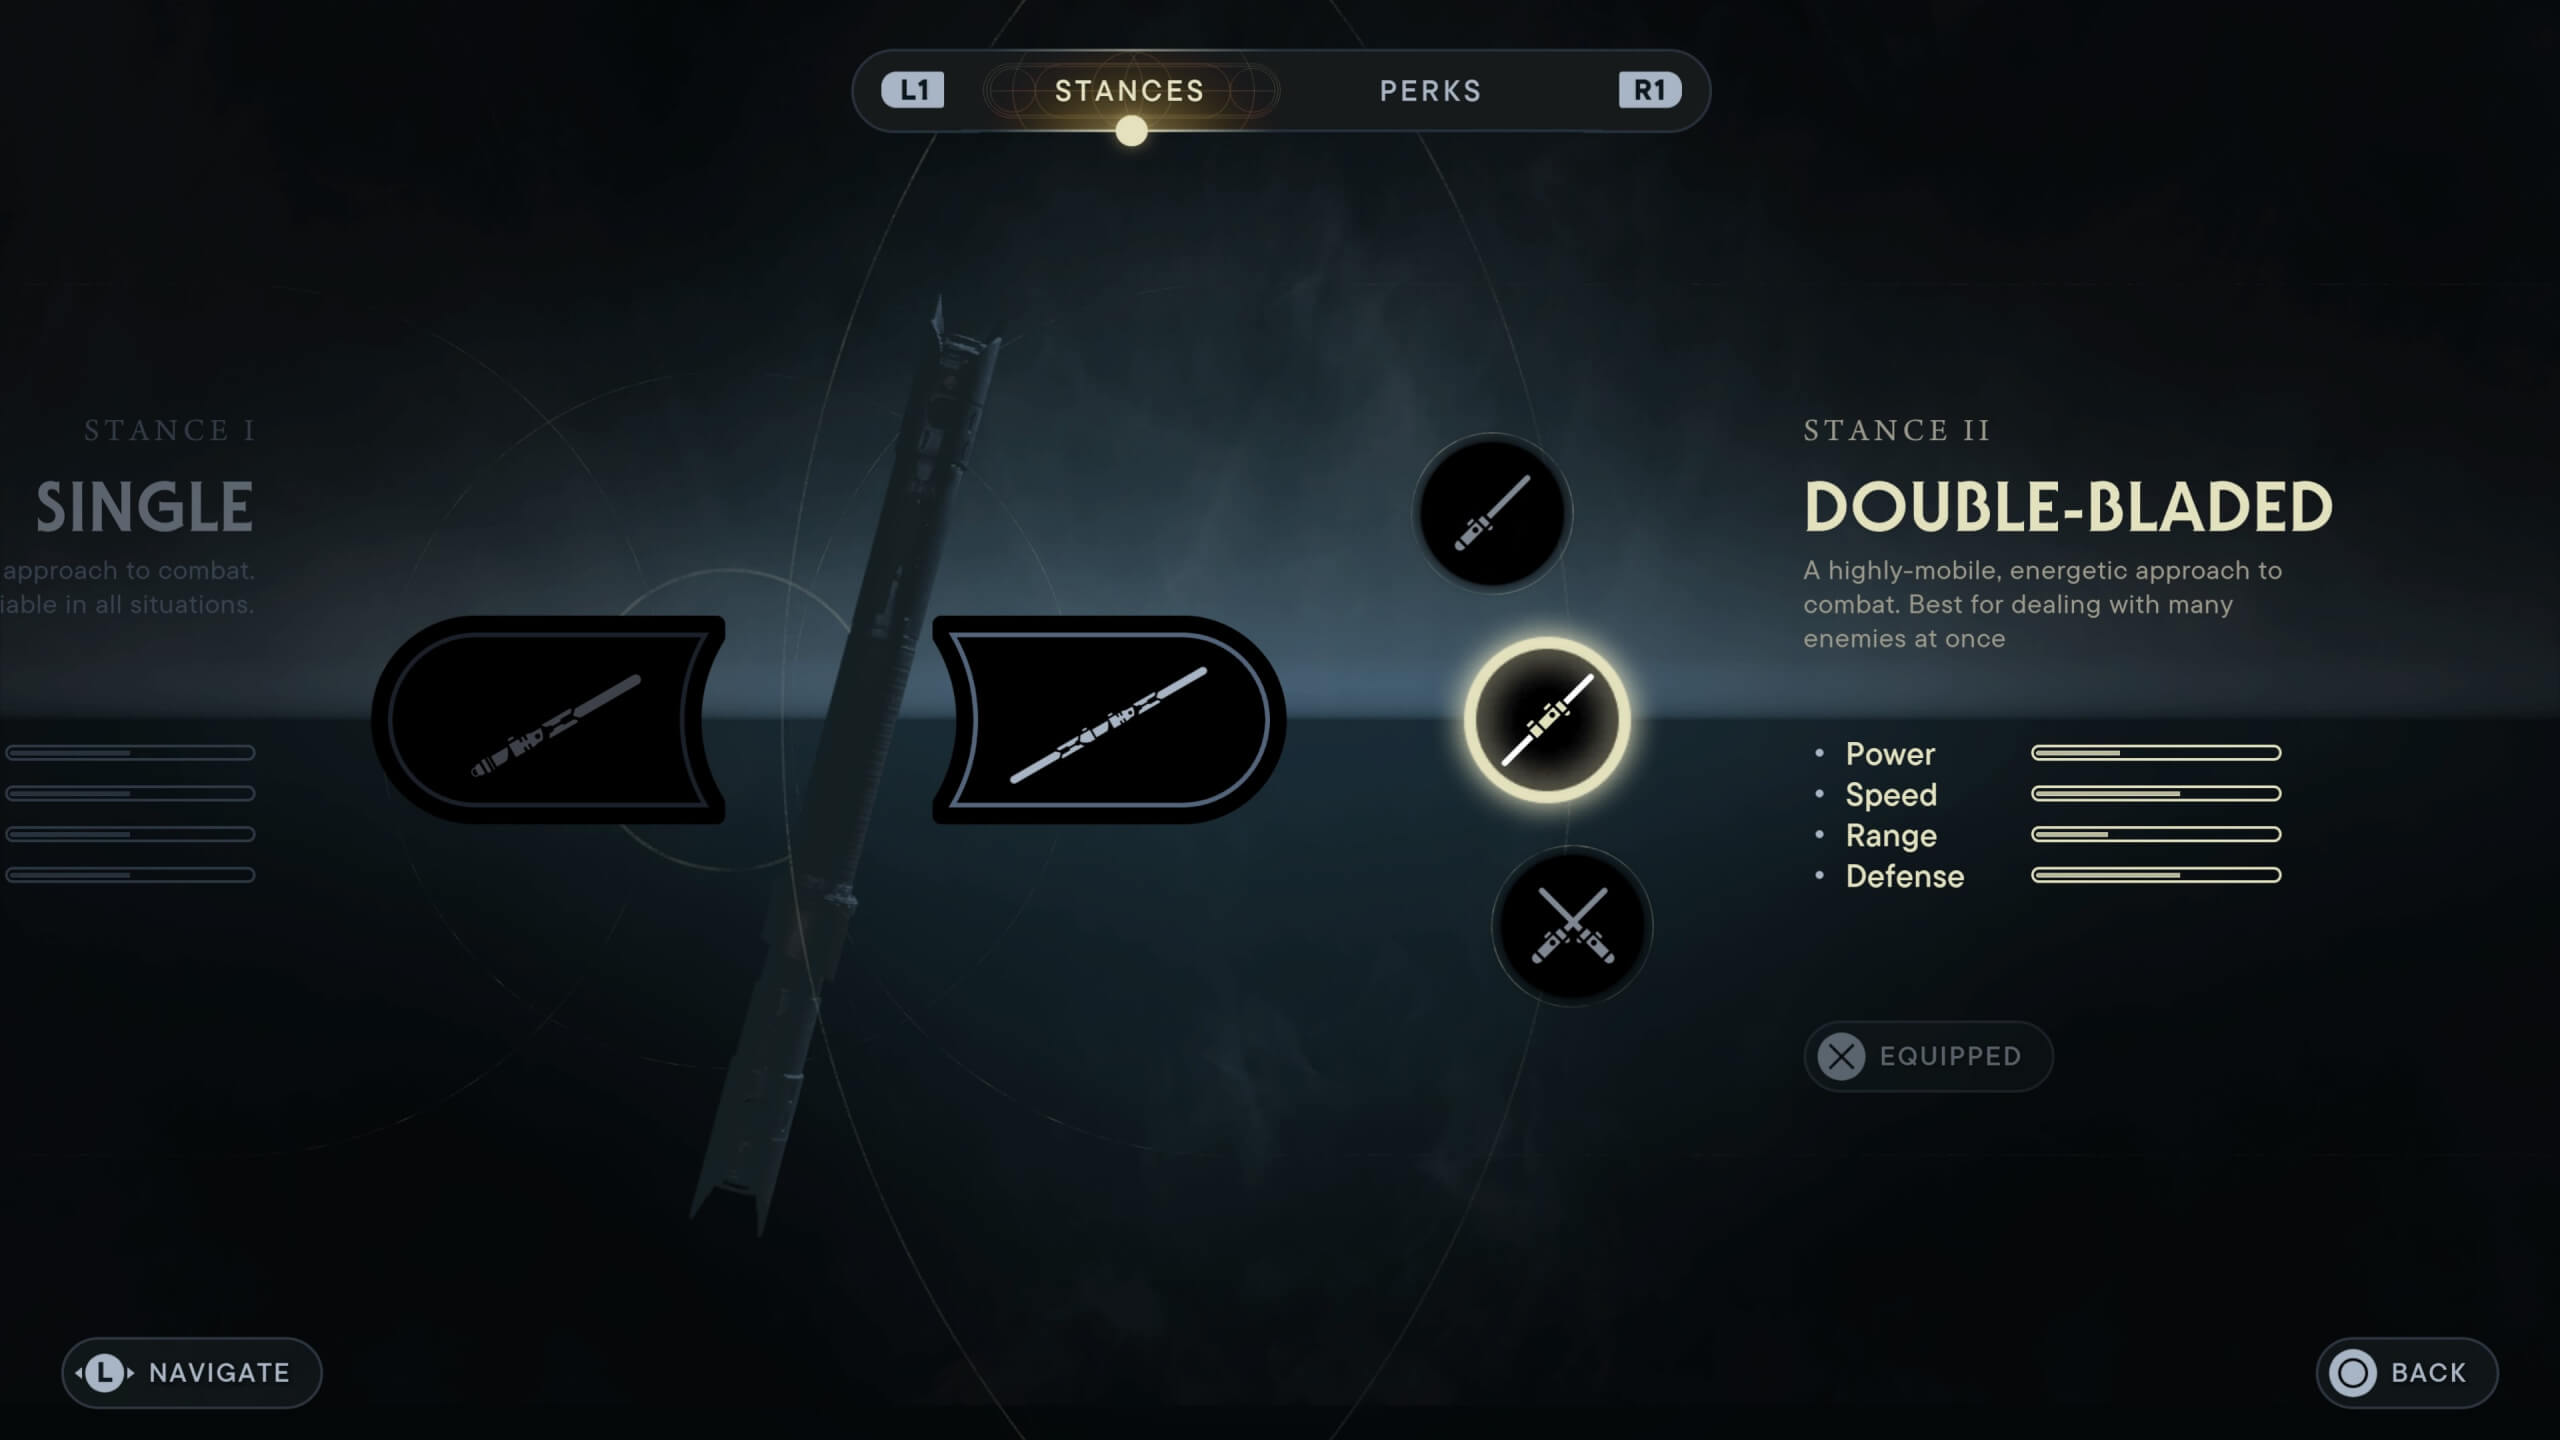 Menu listing the lightsabre stances that players can equip to Cal. currently the Double-Bladed stance is shown with a brief description and stats.